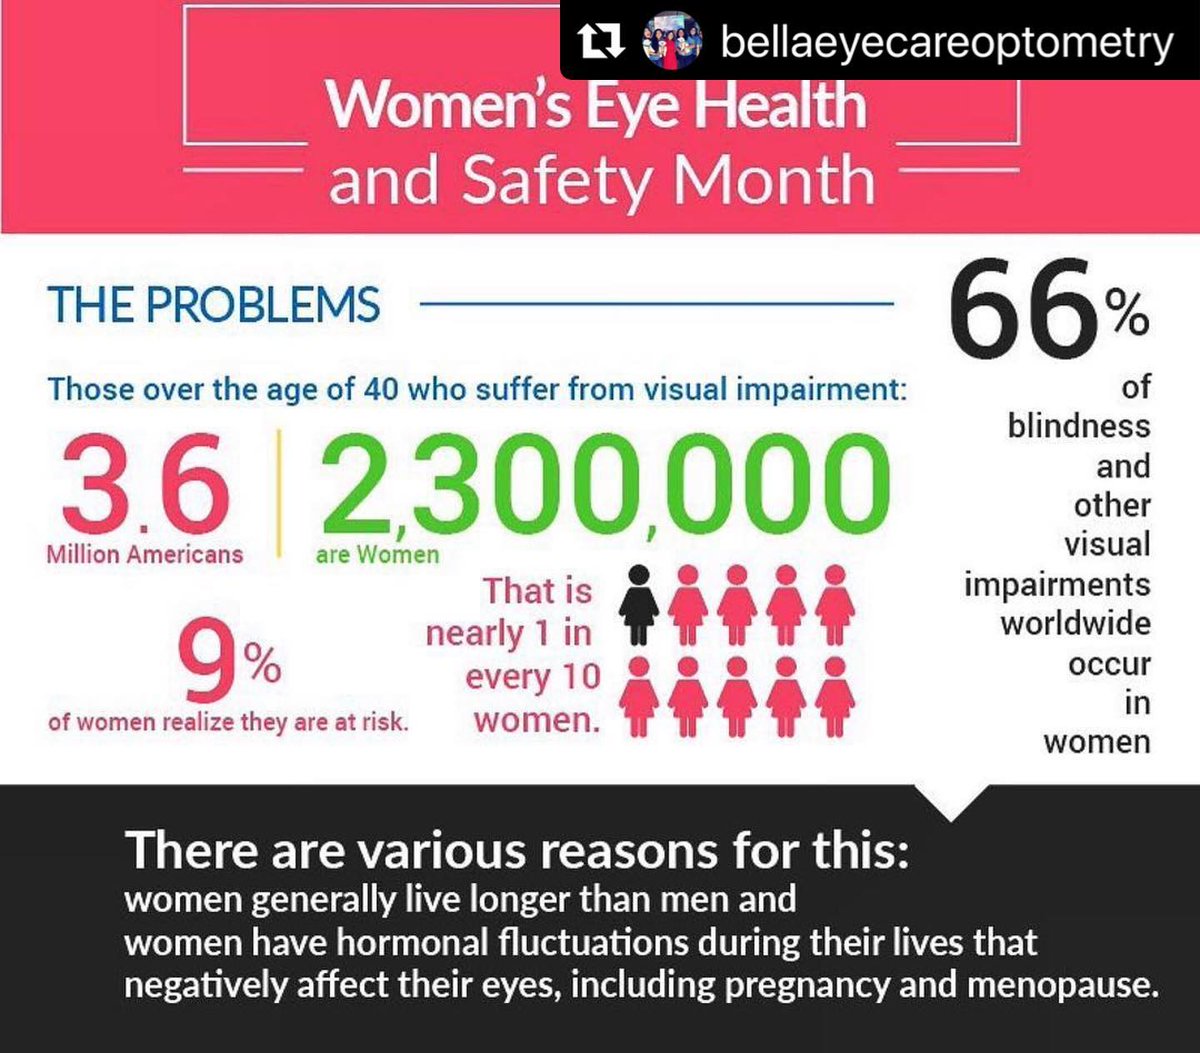 Reposted from @BellaEyeCare Instagram:
April is Women’s Eye Health and Safety Month designated by @PBA_savingsight!
♀♀ ♀ ♀
For more information on #womenseyehealth please visit below website + @PBTEXAS
preventblindness.org/see-jane-see